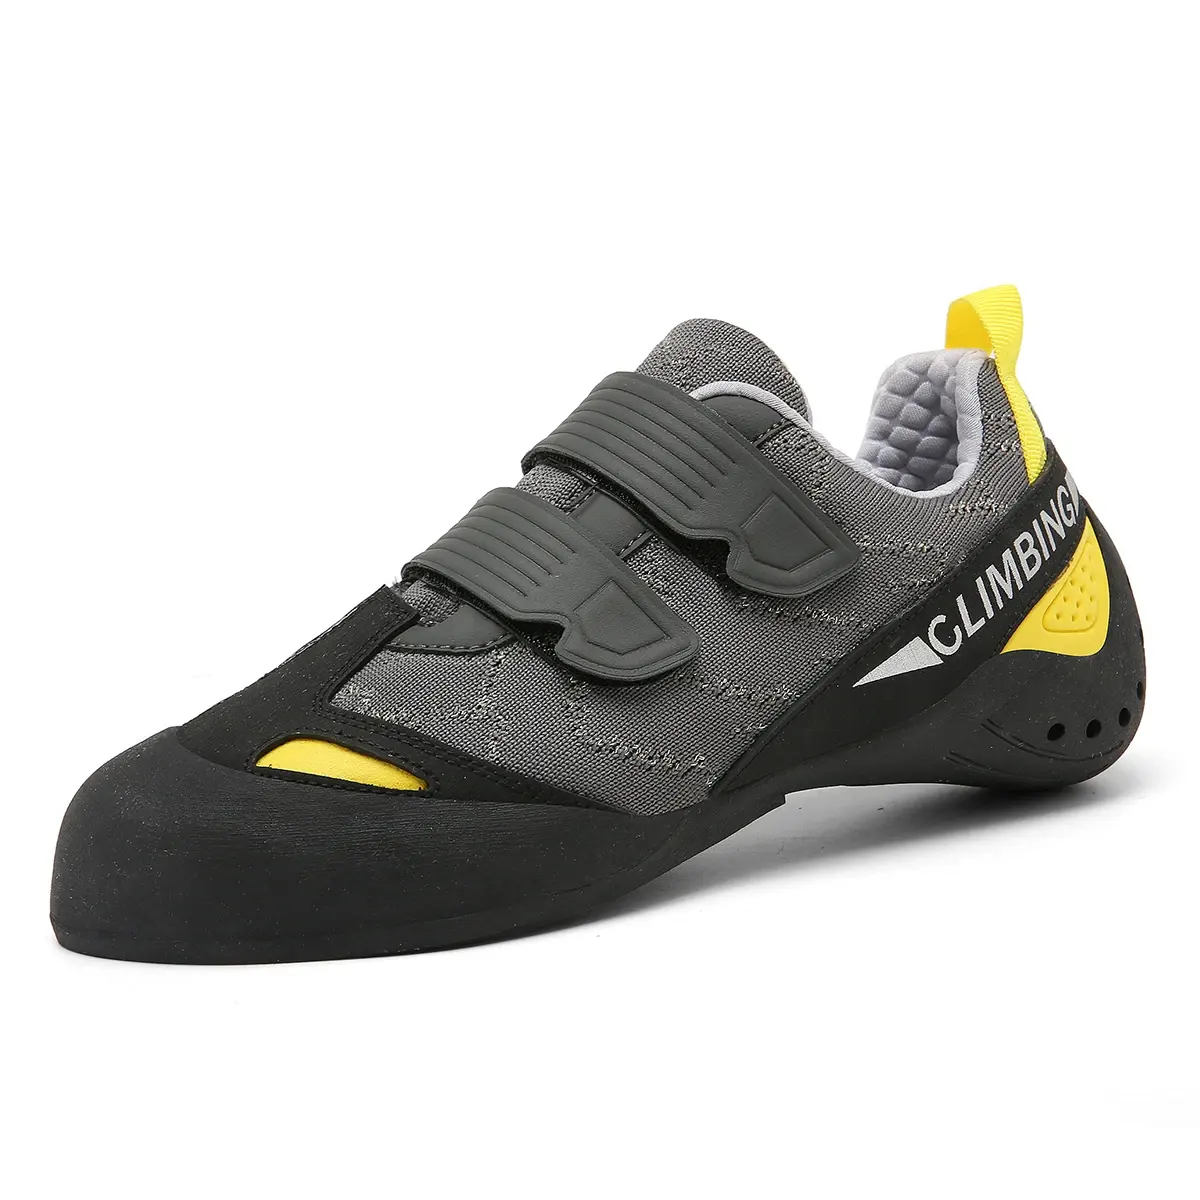 New Design Outdoor Customize Rock Climbing Shoes For Sport Climbing And Bouldering Training Shoes